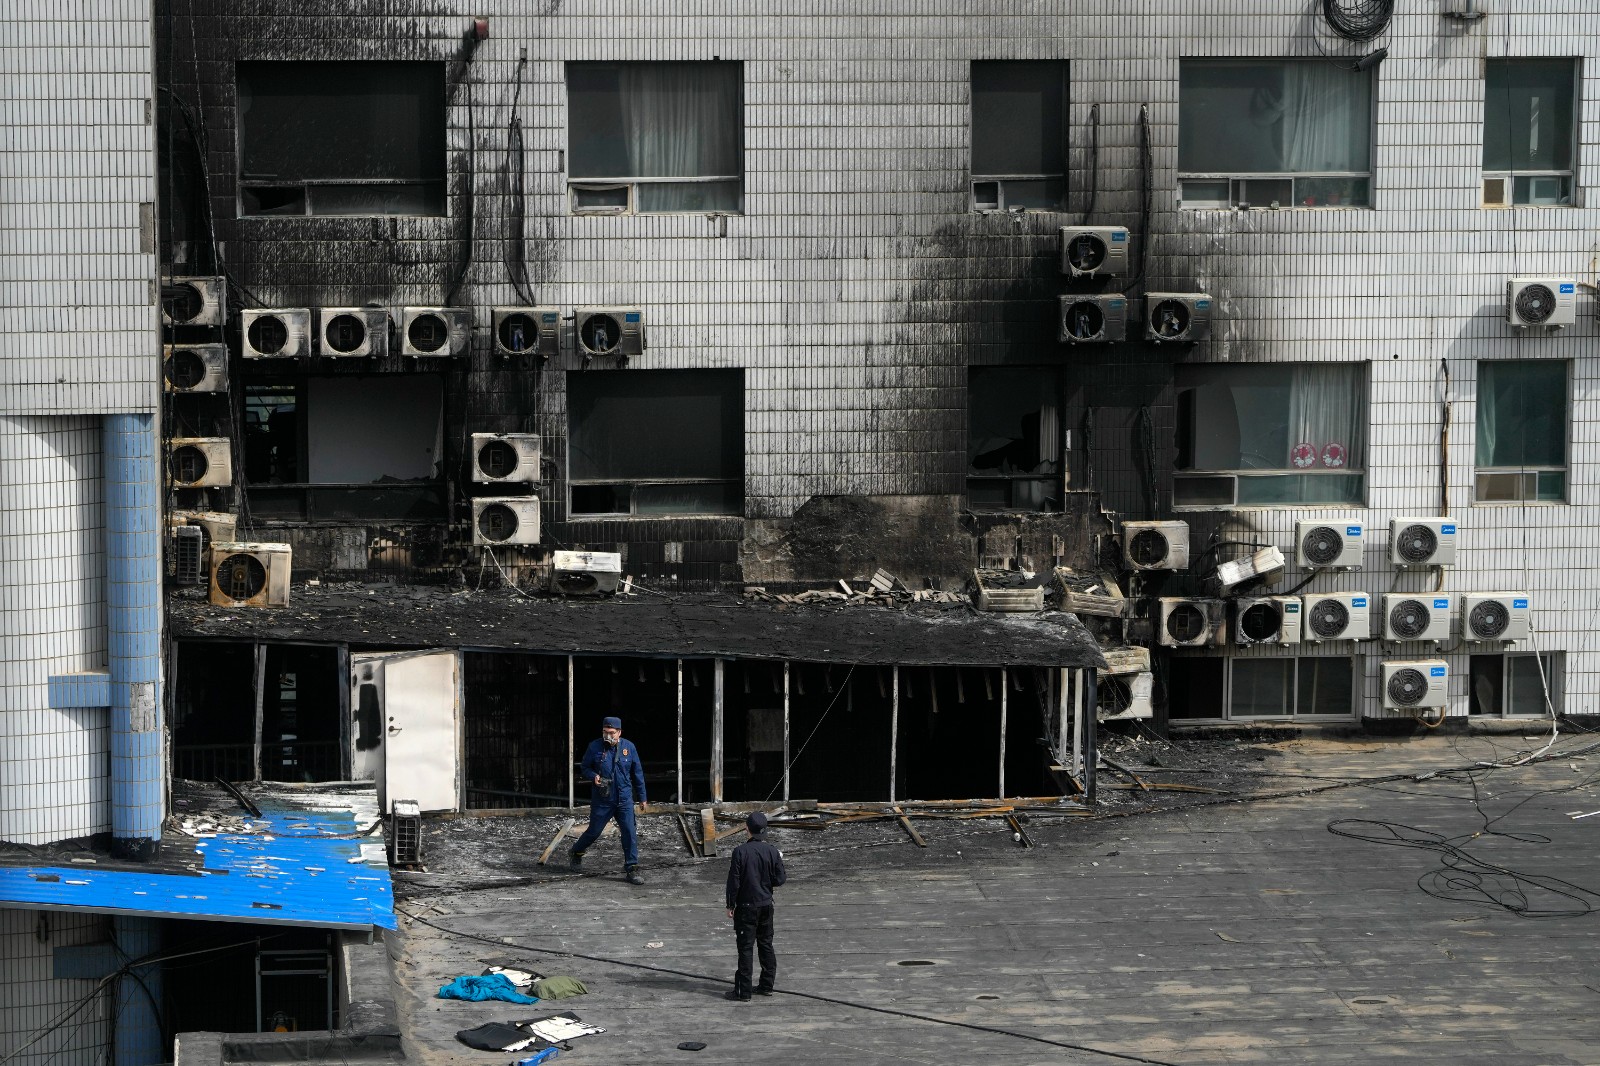 Beijing hospital fire death toll rises to 29